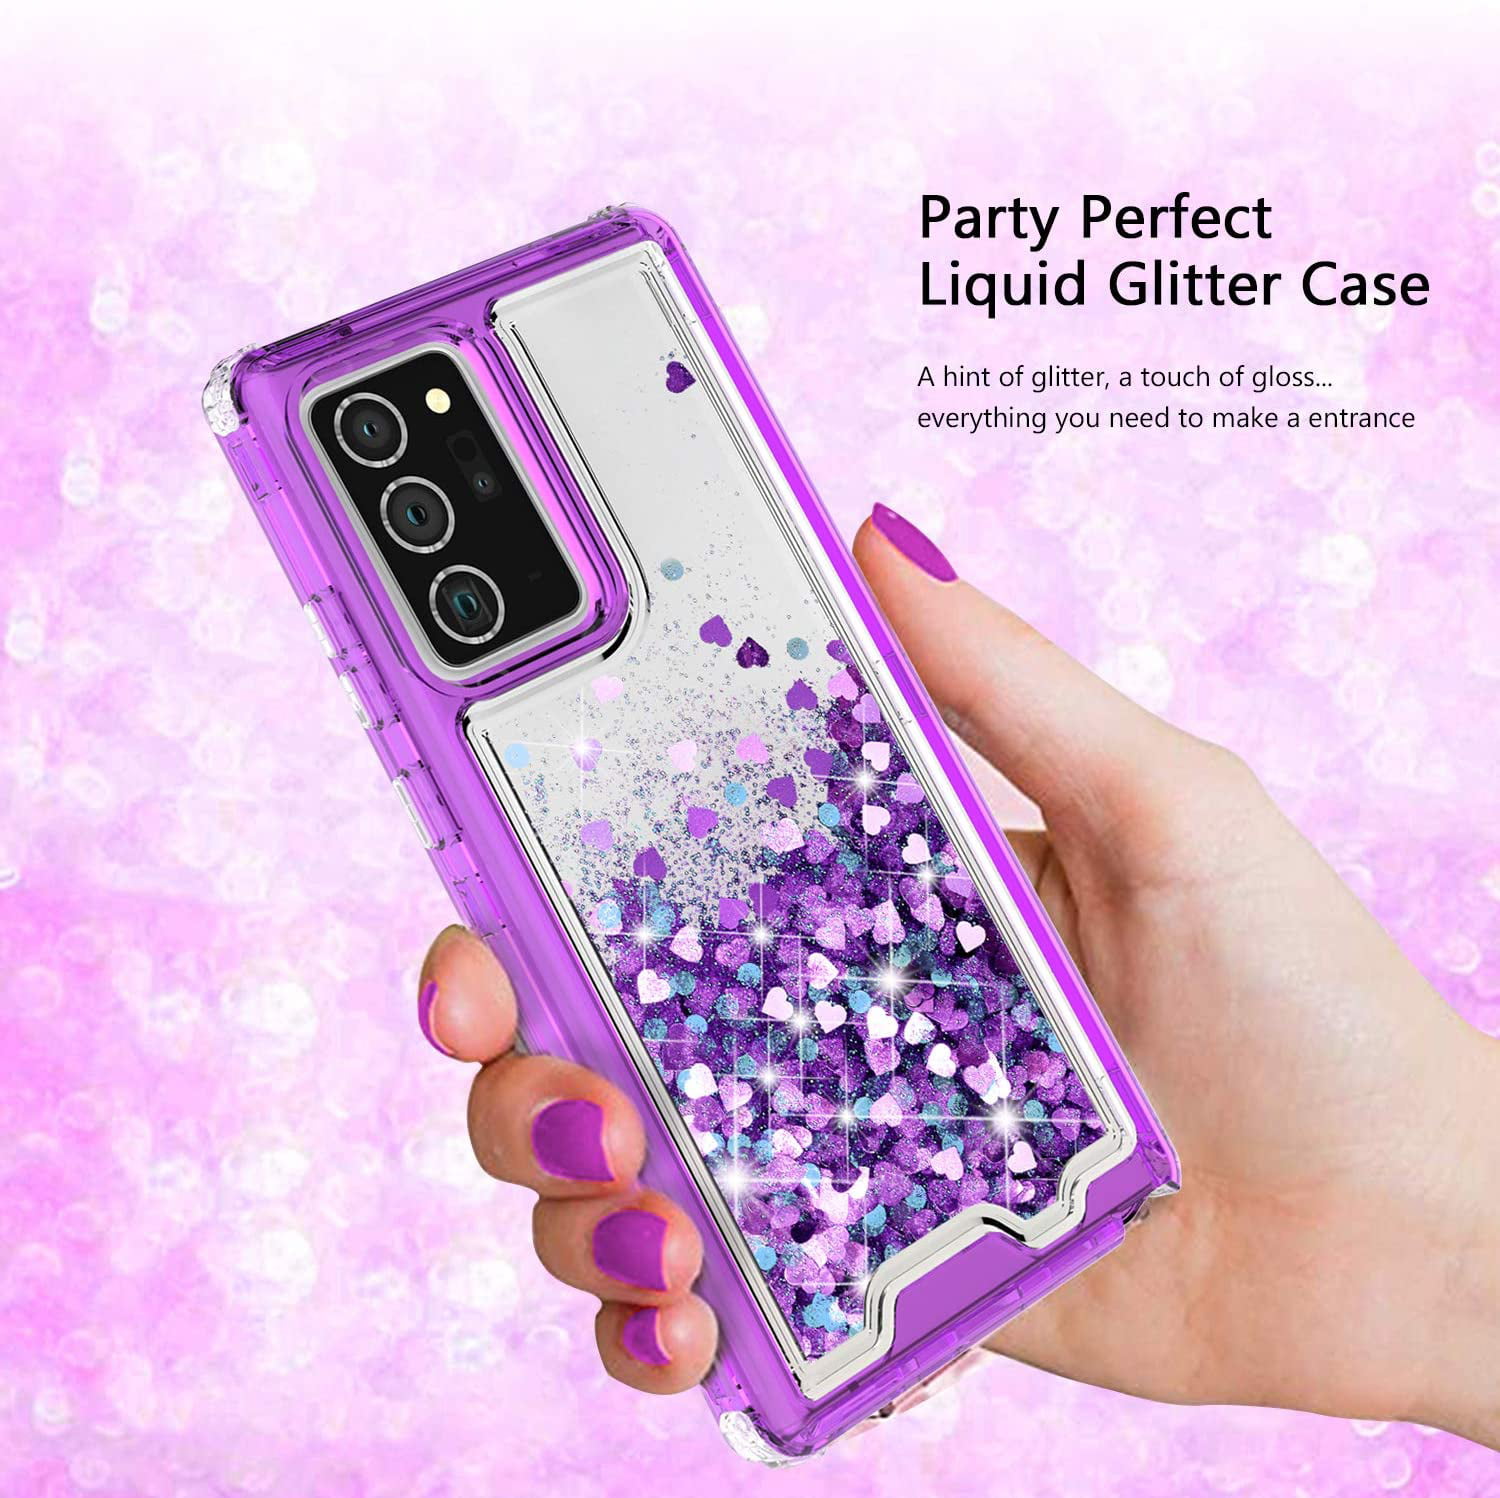 YmhxcY Galaxy Note 20 Ultra Case - 3 Layer Drop Protection, Shockproof  Silicone & Clear Cover - Transparent Purple